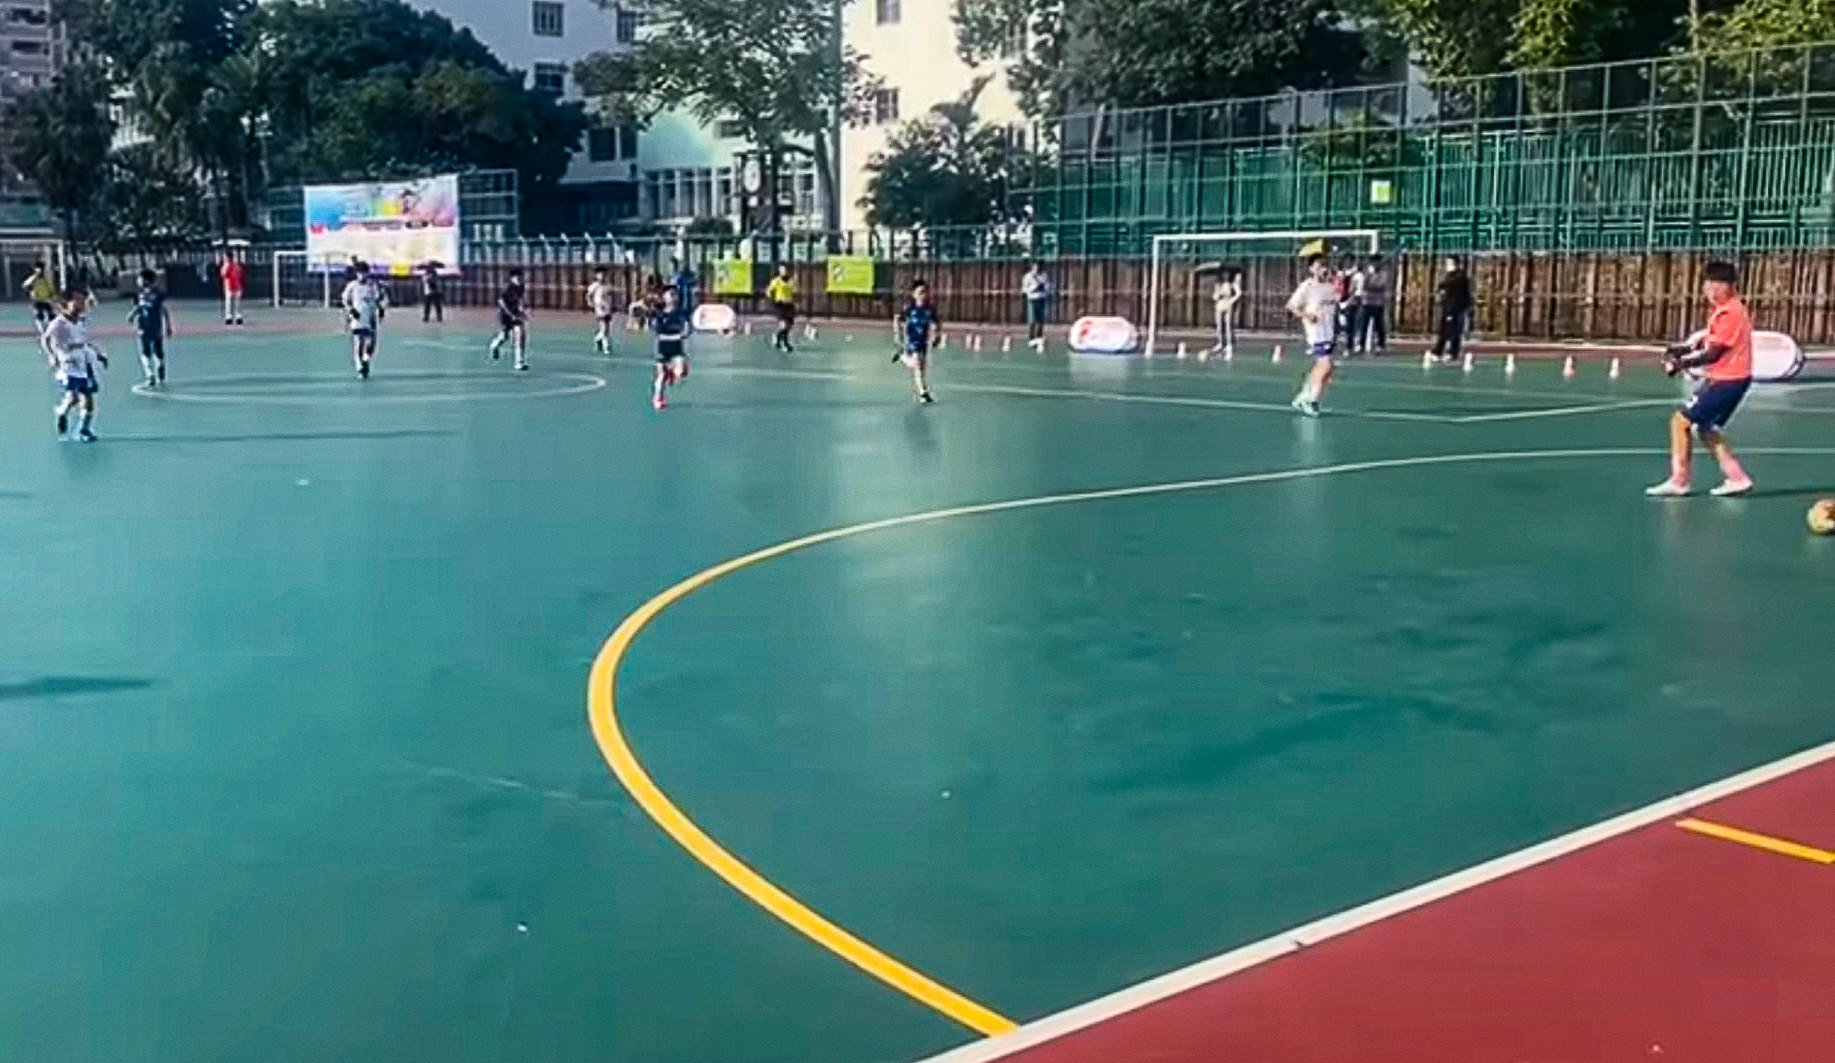 A screen grab from a video shows the ball rolling past the goalkeeper during the game between Kwai Chung district and Tuen Mun district. Photo: Handout